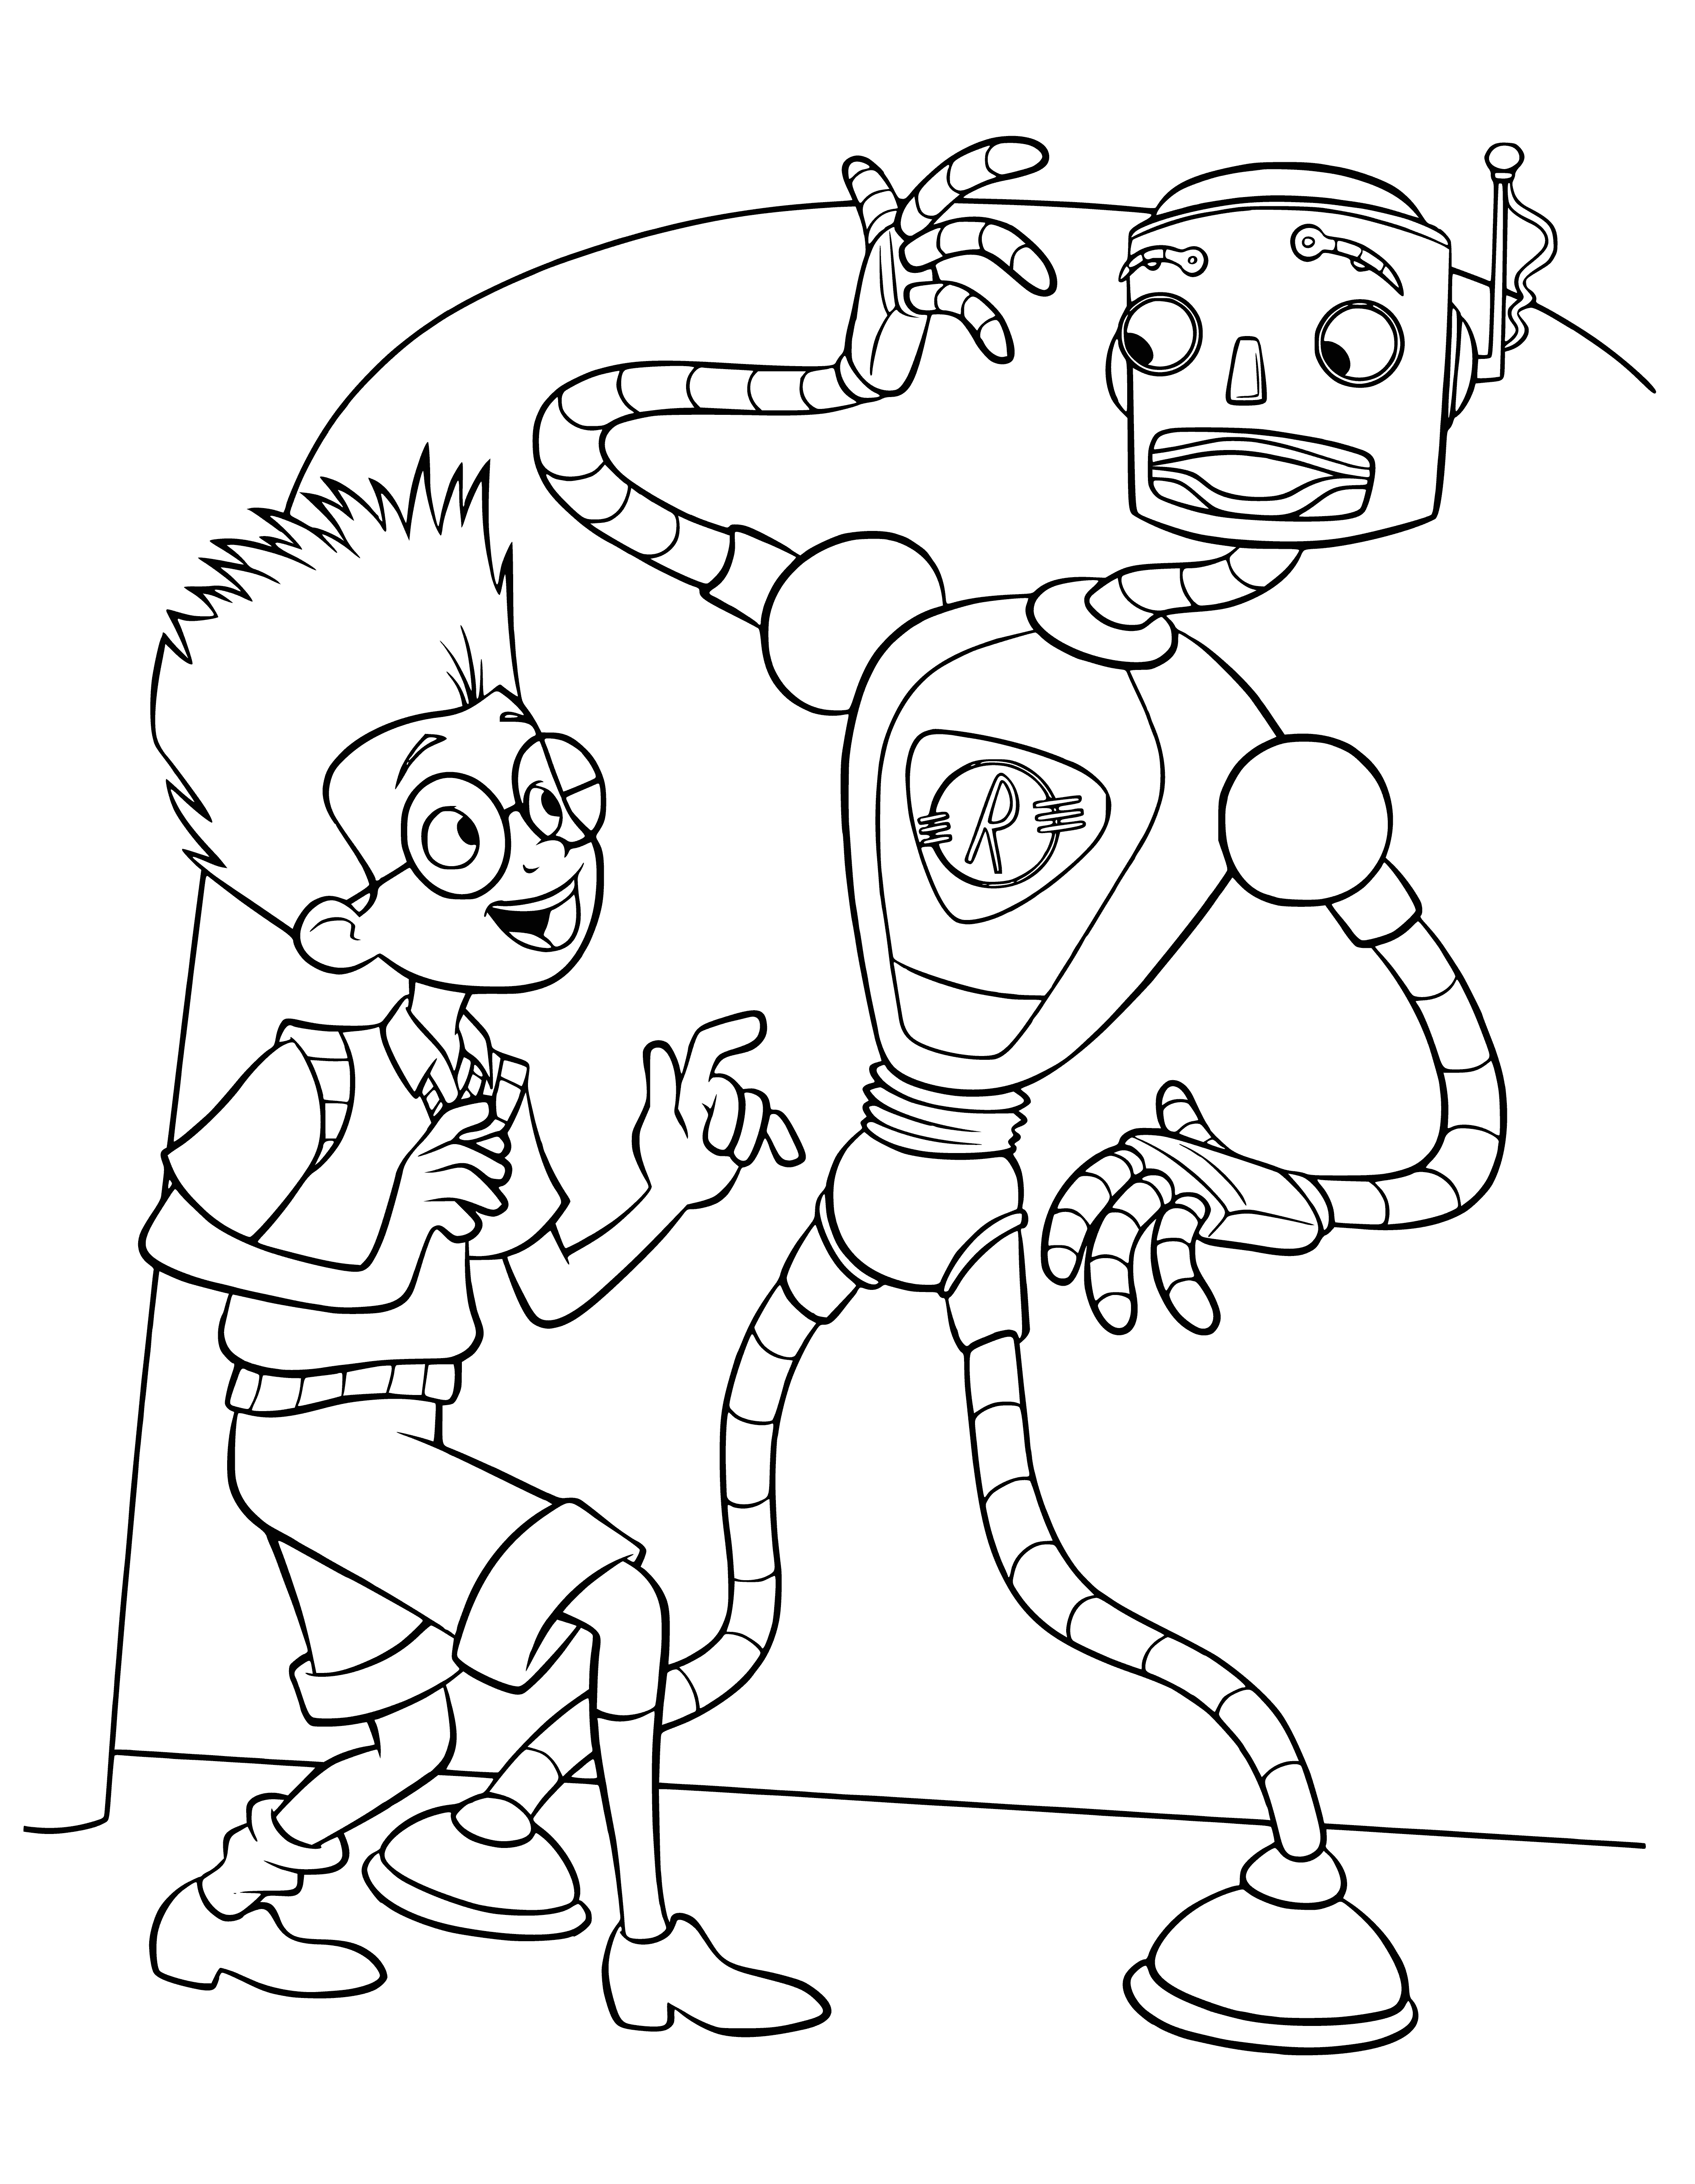 coloring page: Large, hulking robot w/ square head, yellow eyes, O-shaped mouth & dull grey body, standing on 2 metal legs & arms w/ 3 claw-like fingers.